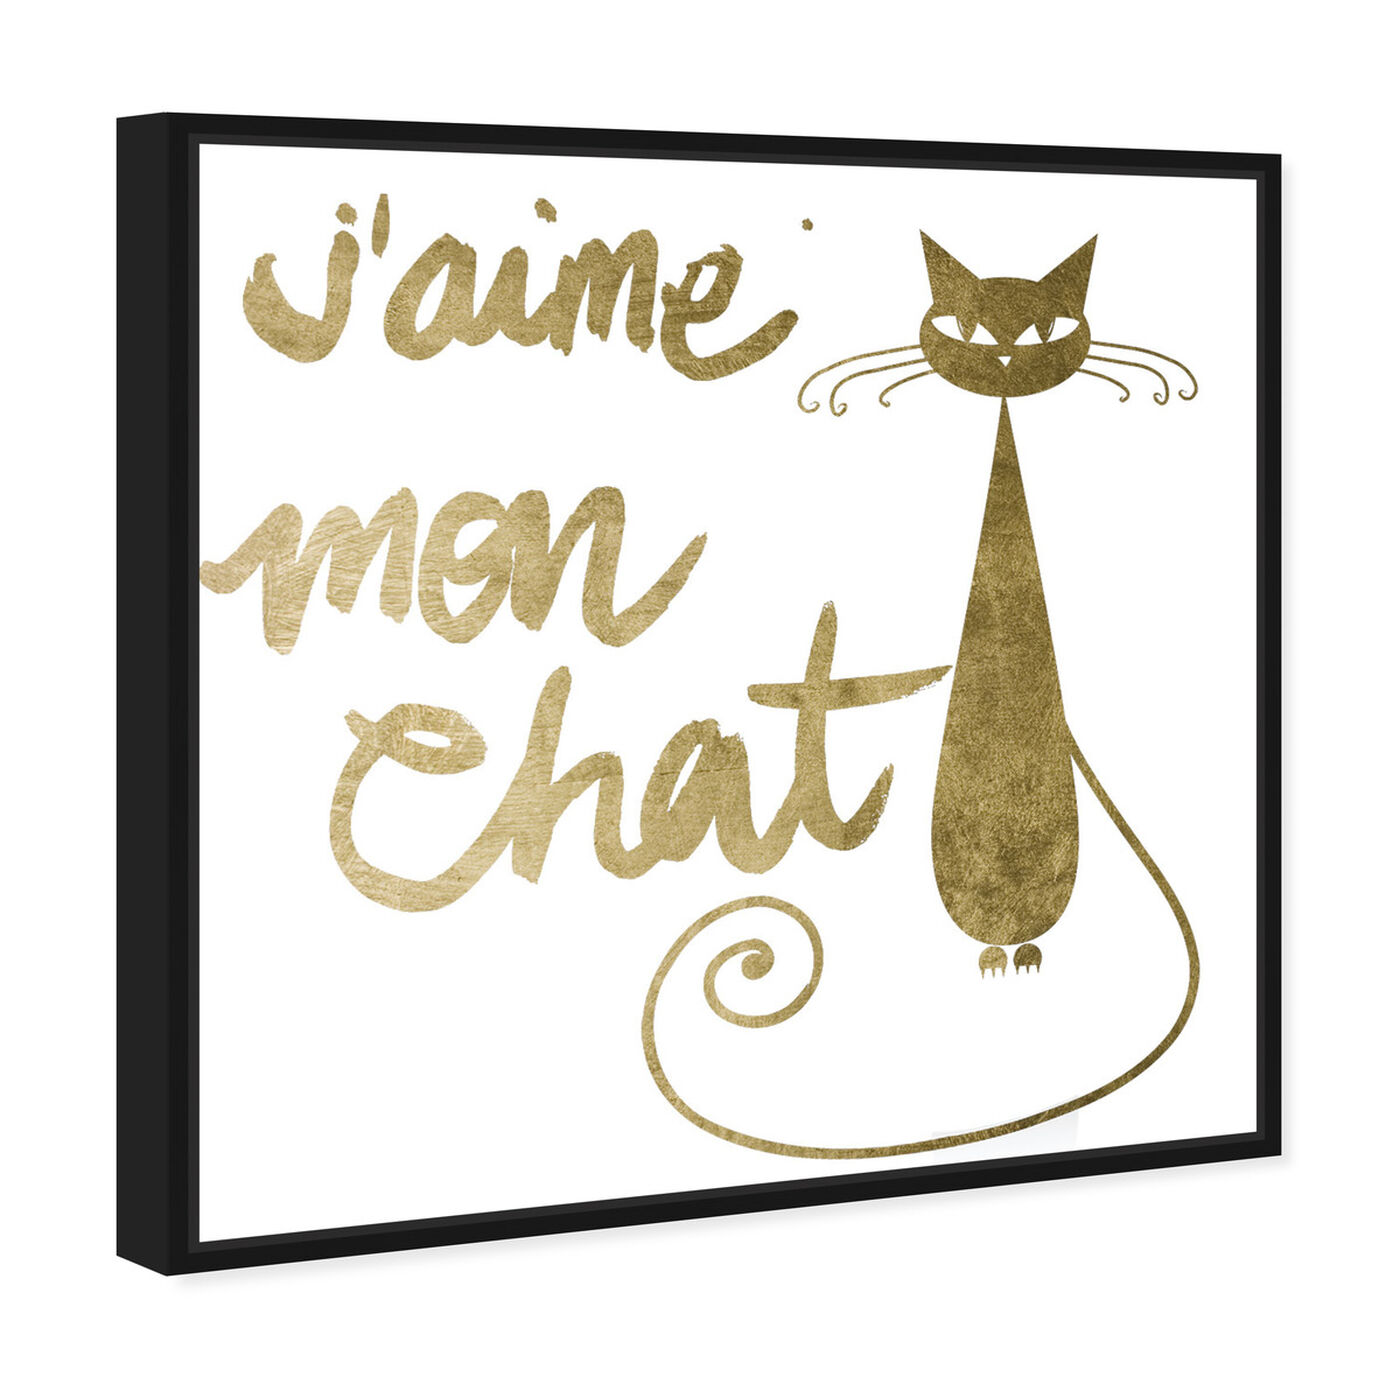 Angled view of Mon Chat featuring typography and quotes and love quotes and sayings art.